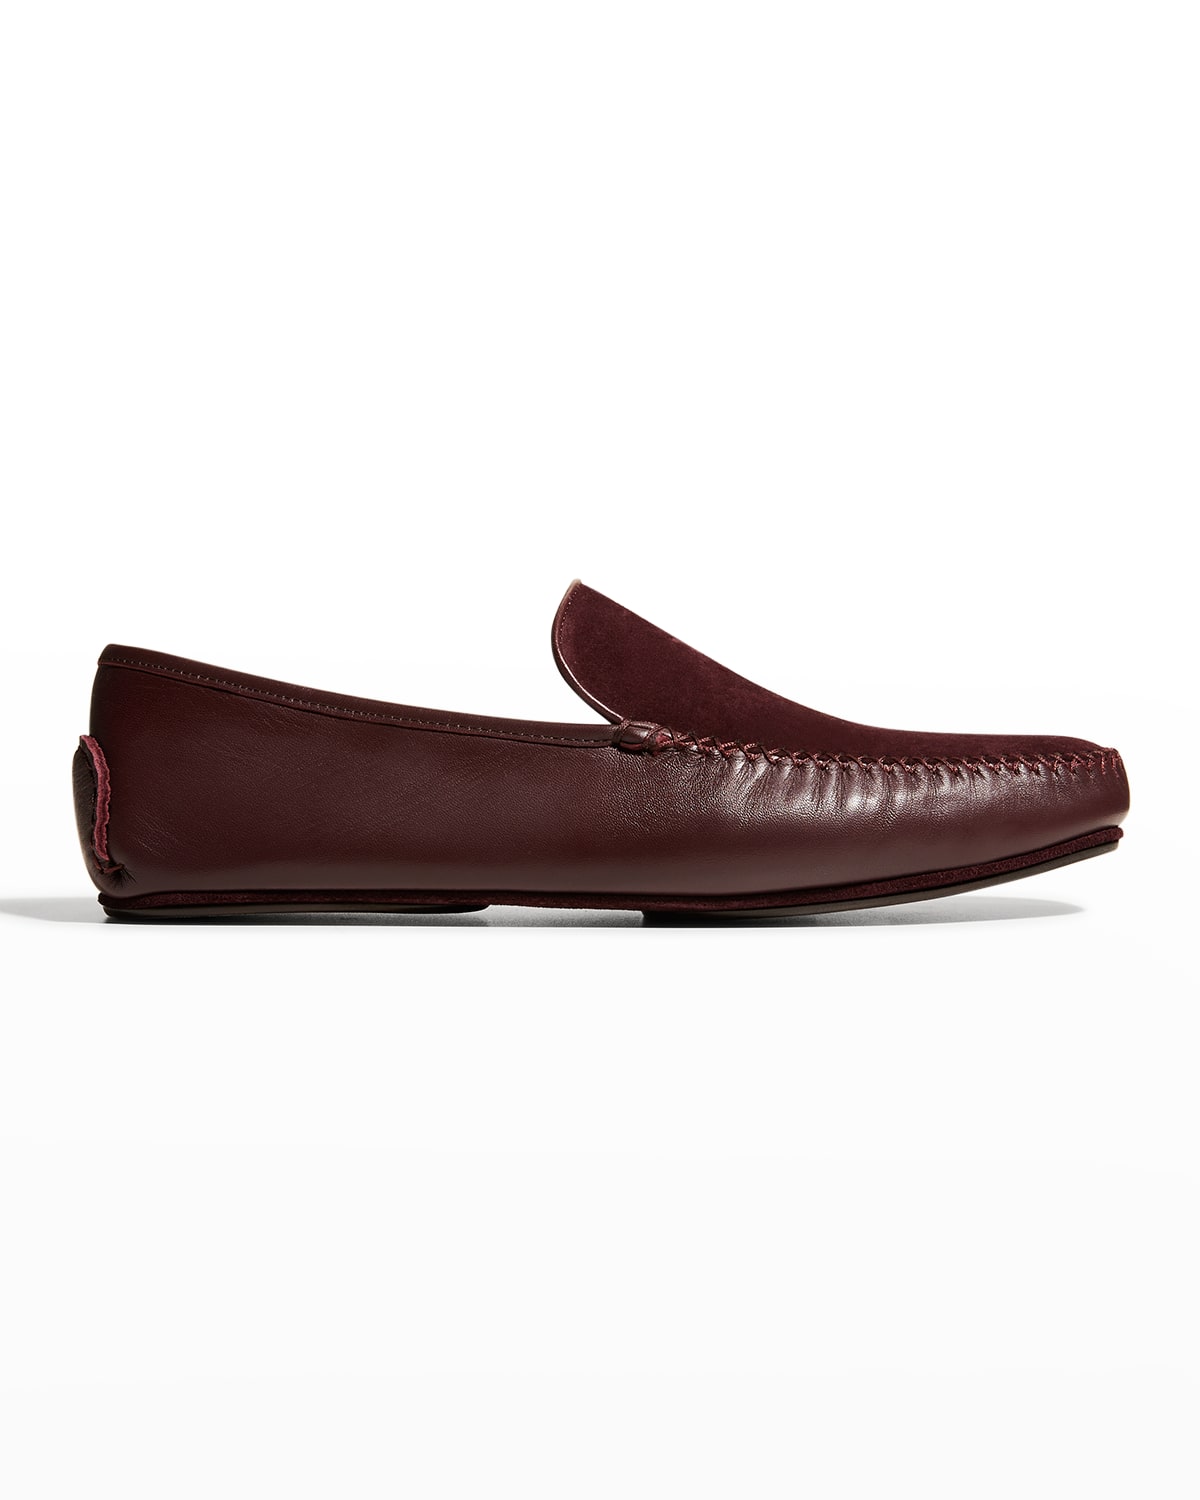 Men's Mayfair Suede-Leather Loafers